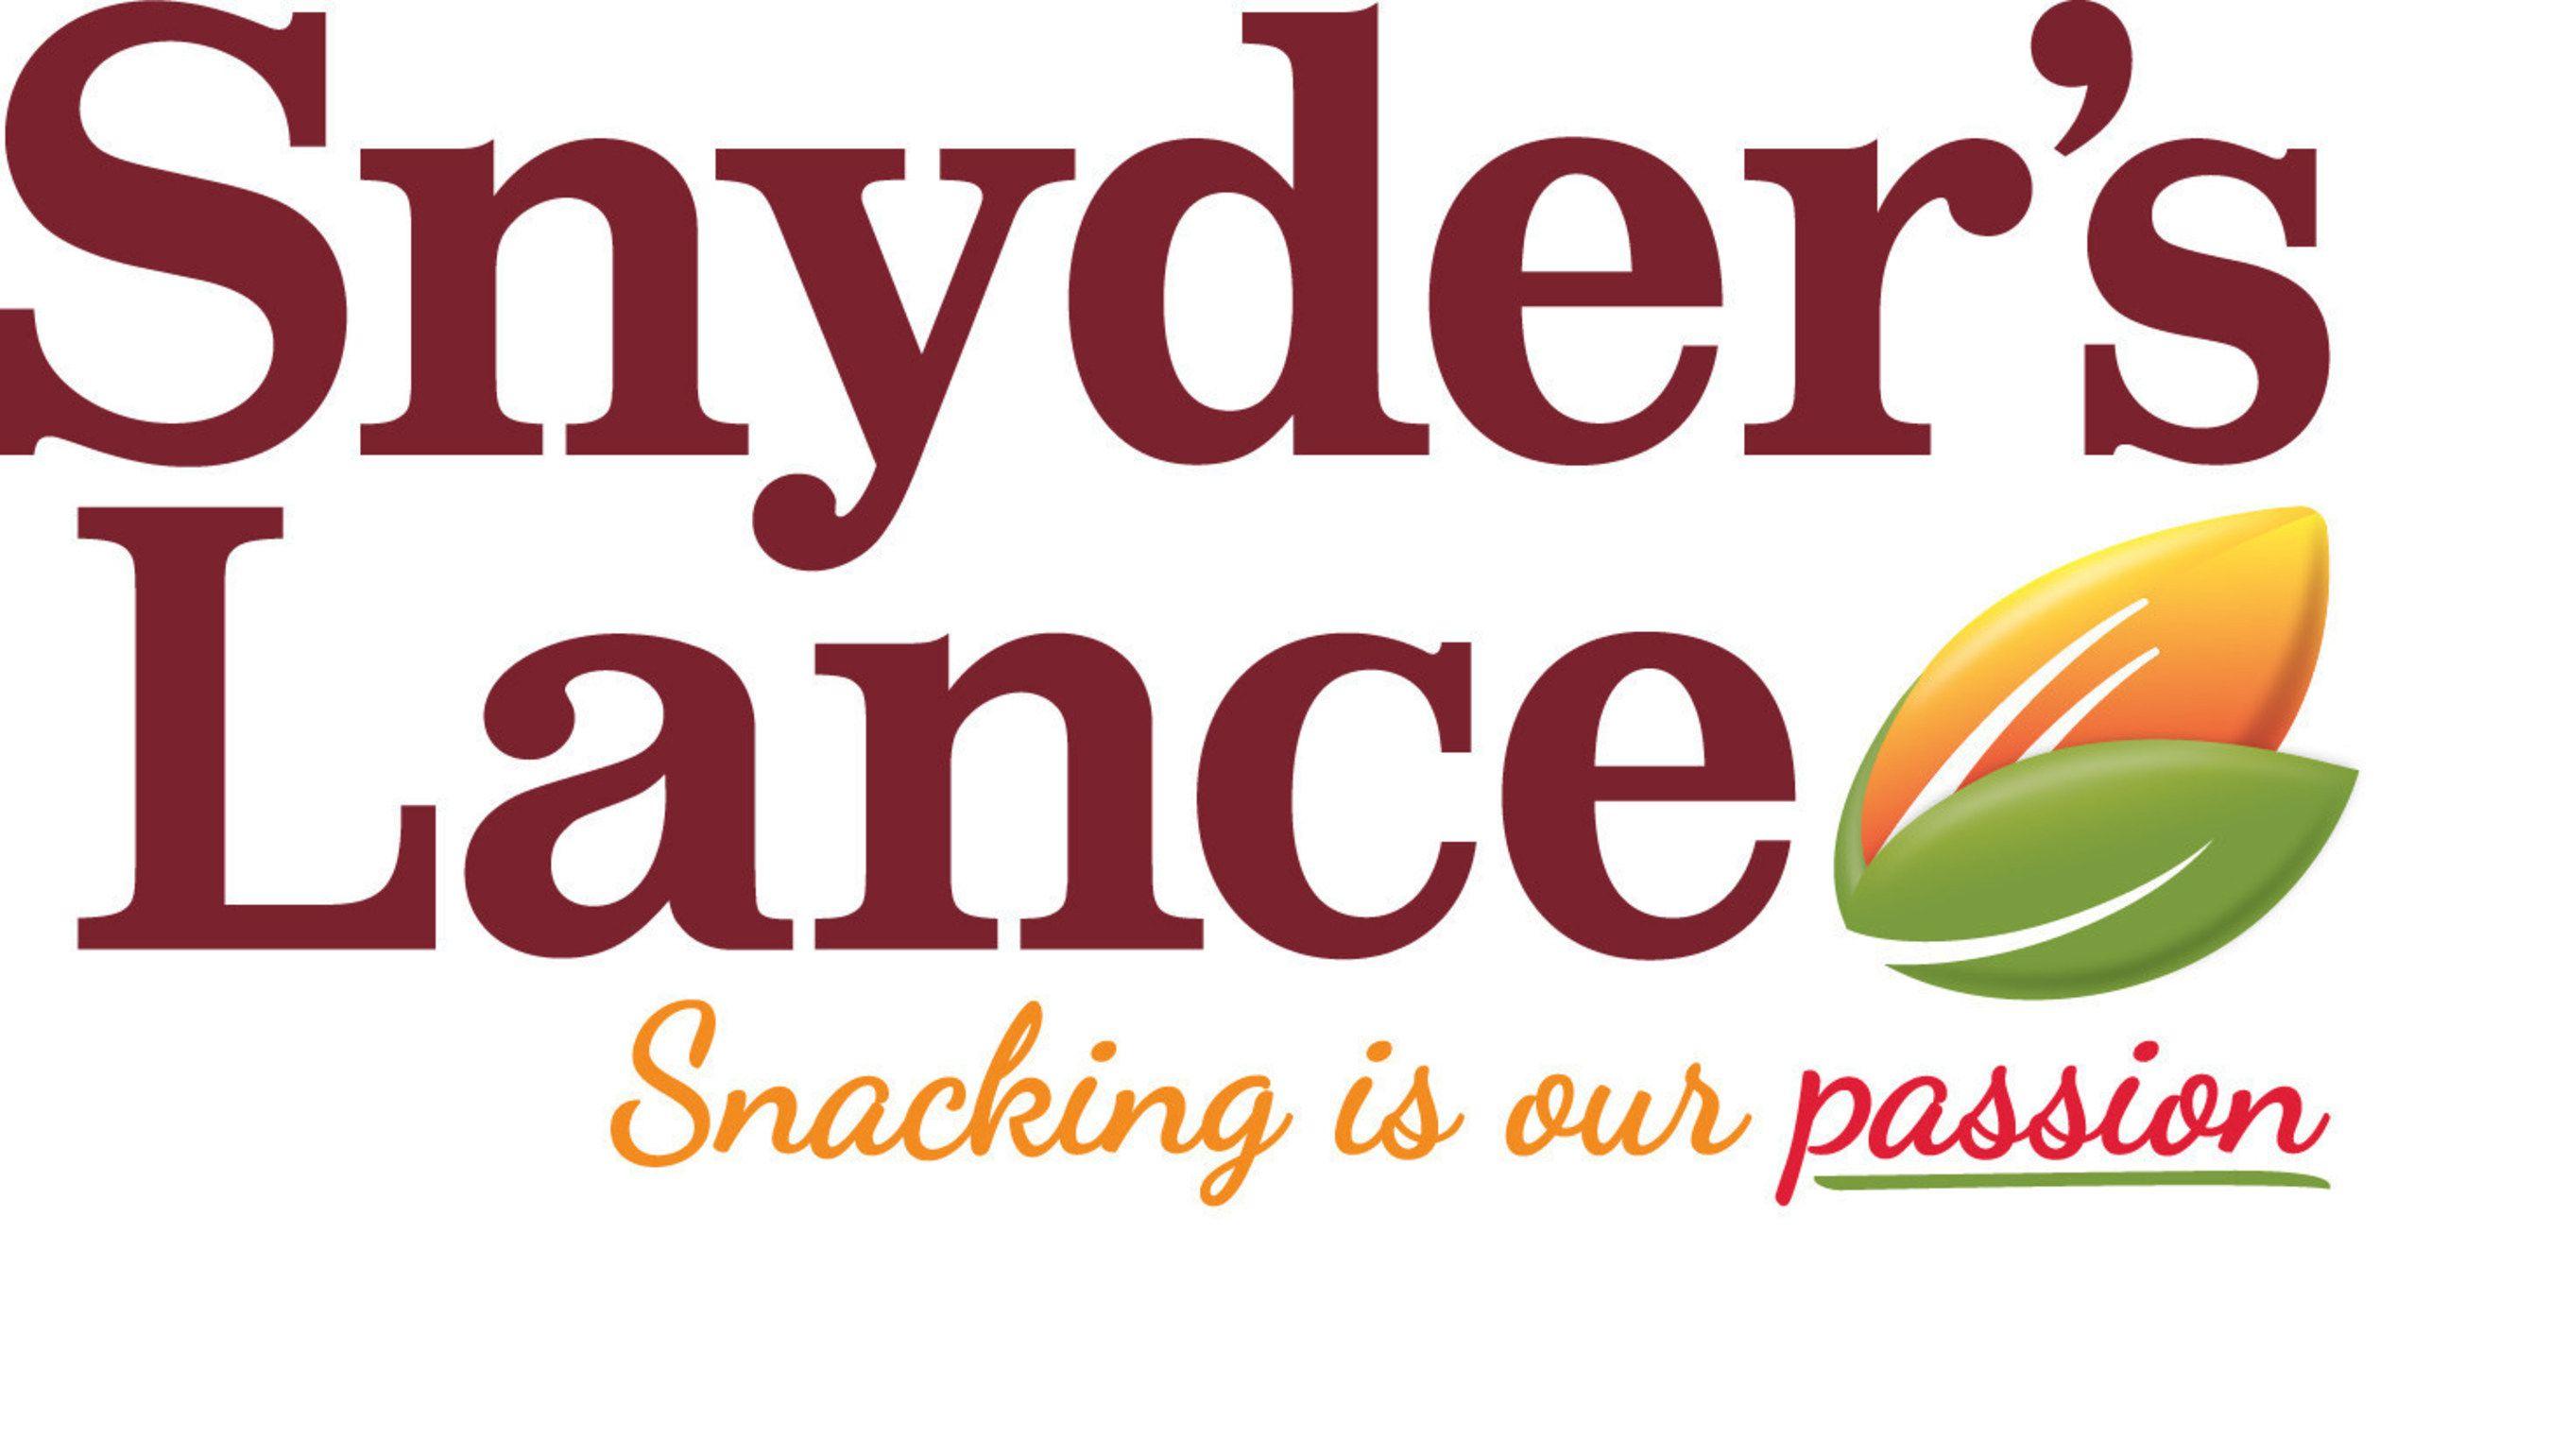 Orange and Red Corporate Logo - Snyder's Lance, Inc. Introduces A New Corporate Logo Reinforcing Its